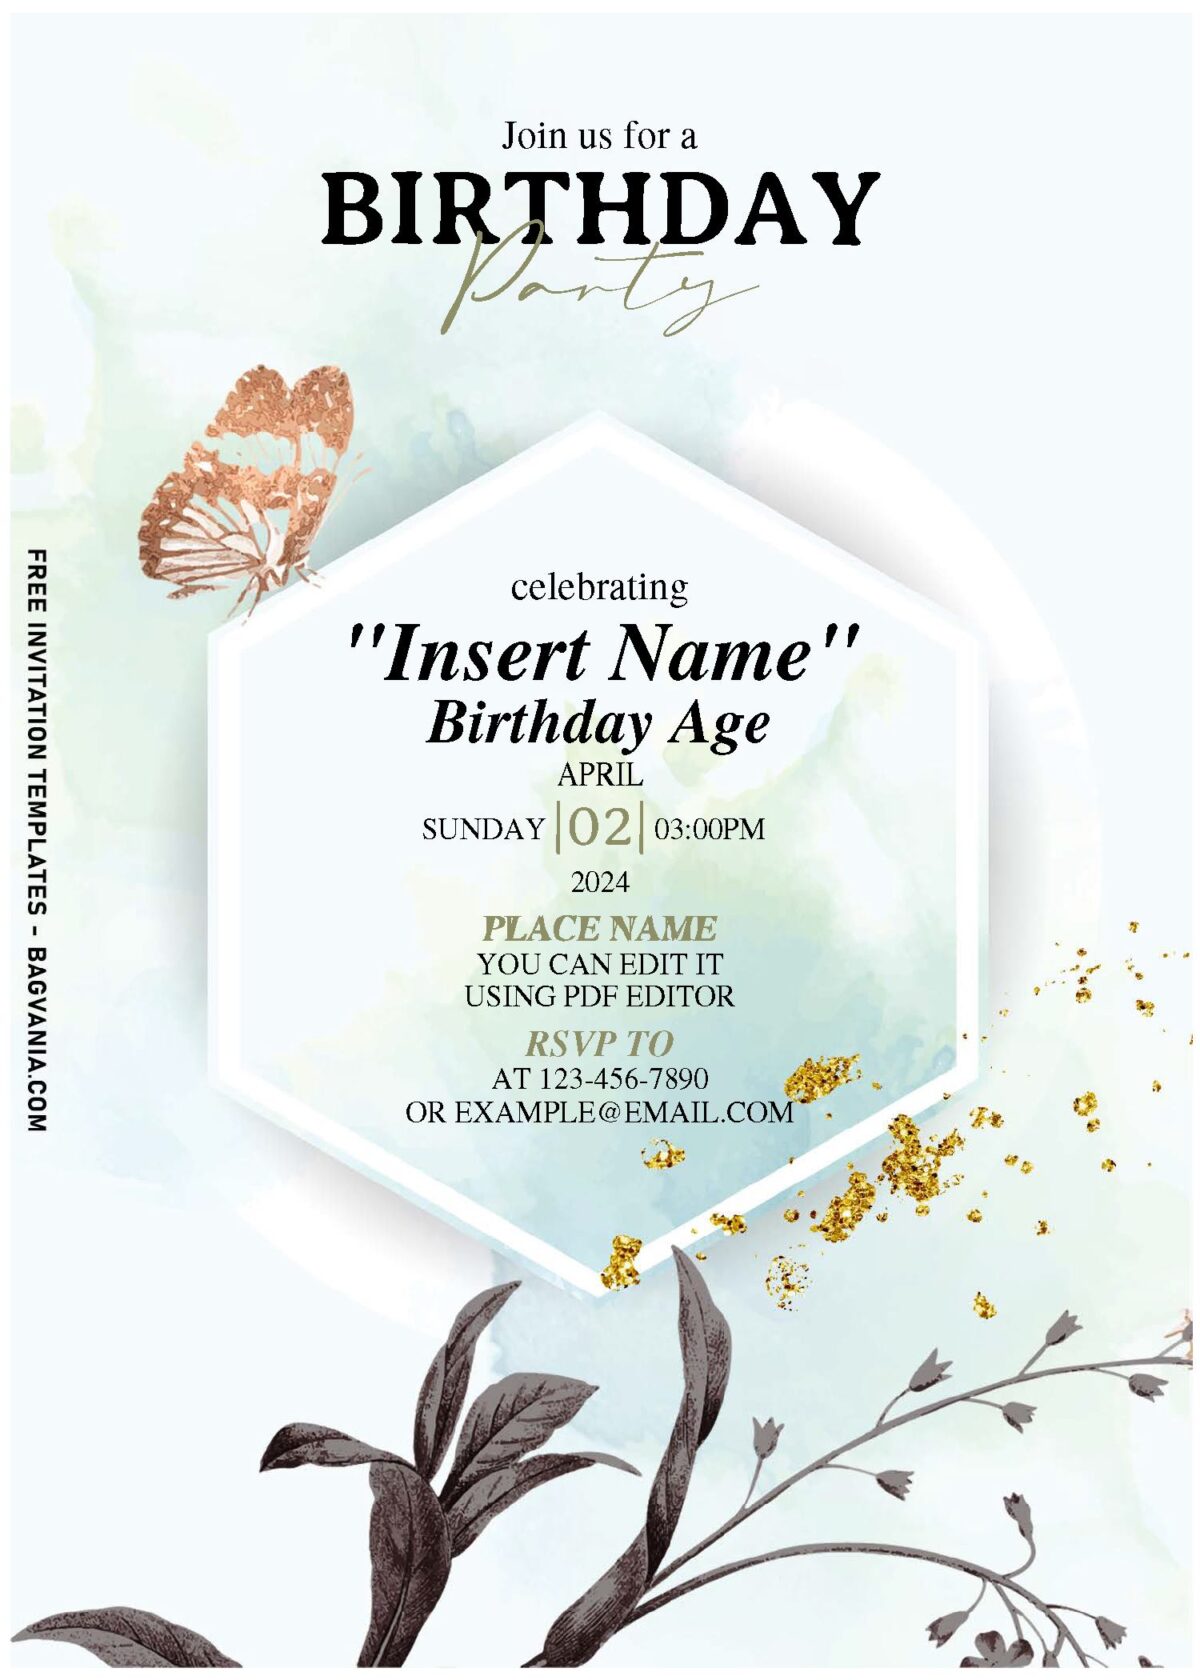 (Free Editable PDF) Magical Garden Full Of Blooms Birthday Invitation Templates with gold butterfly